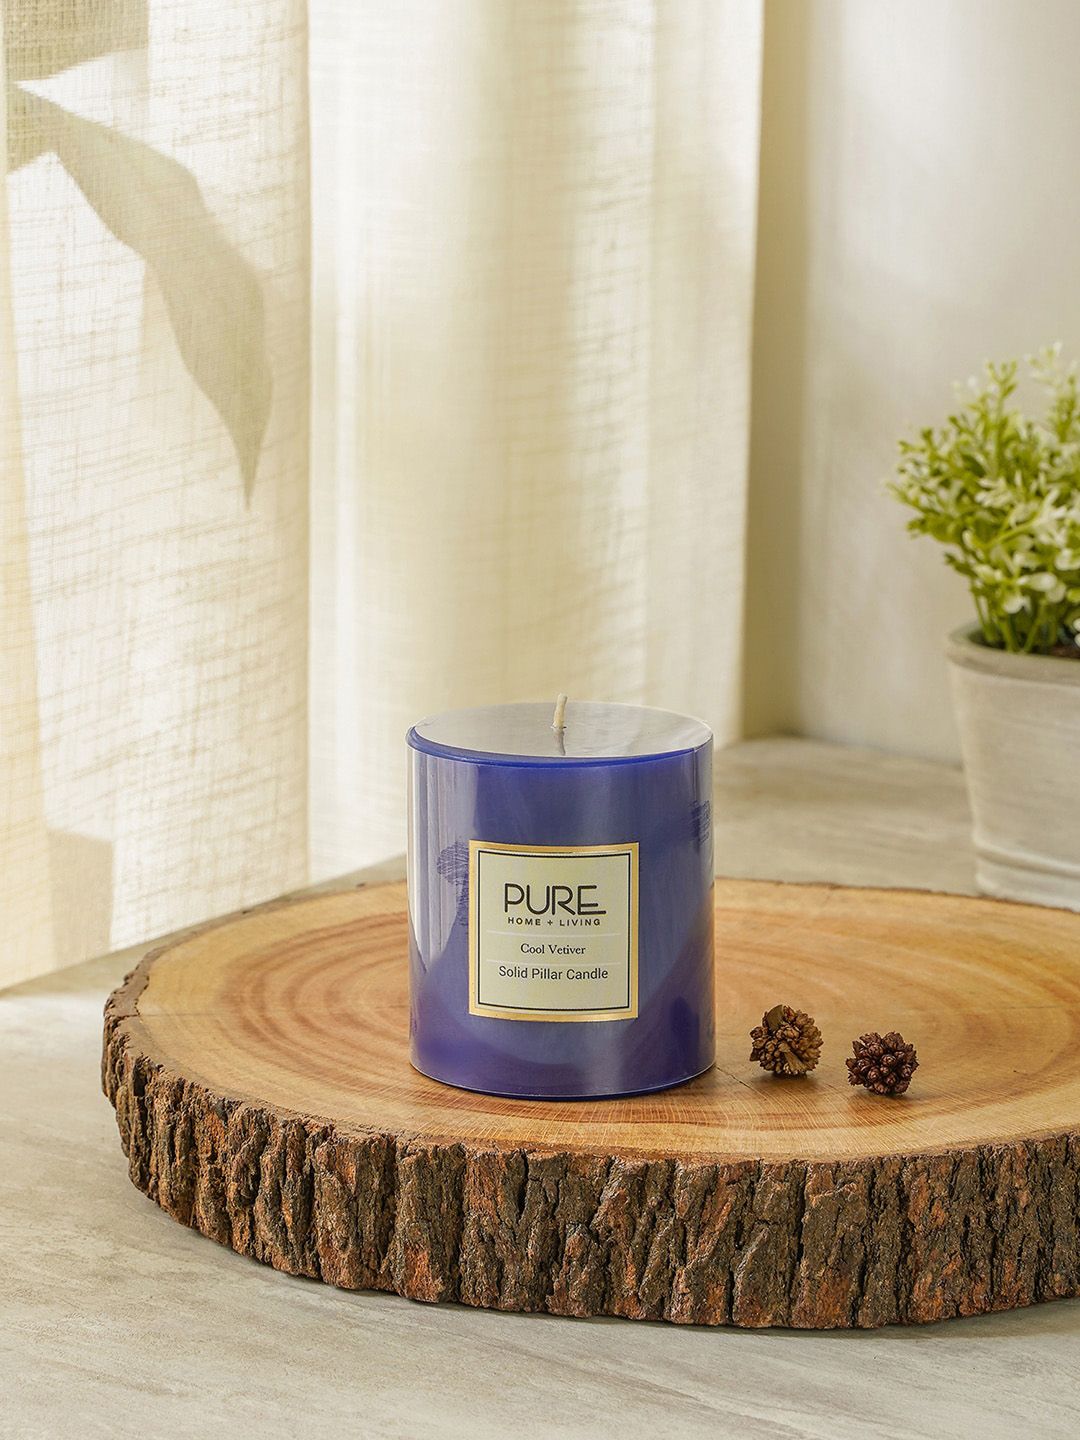 Pure Home and Living Set of 2 Blue Medium Cool Vetiver Pillar Candles Price in India